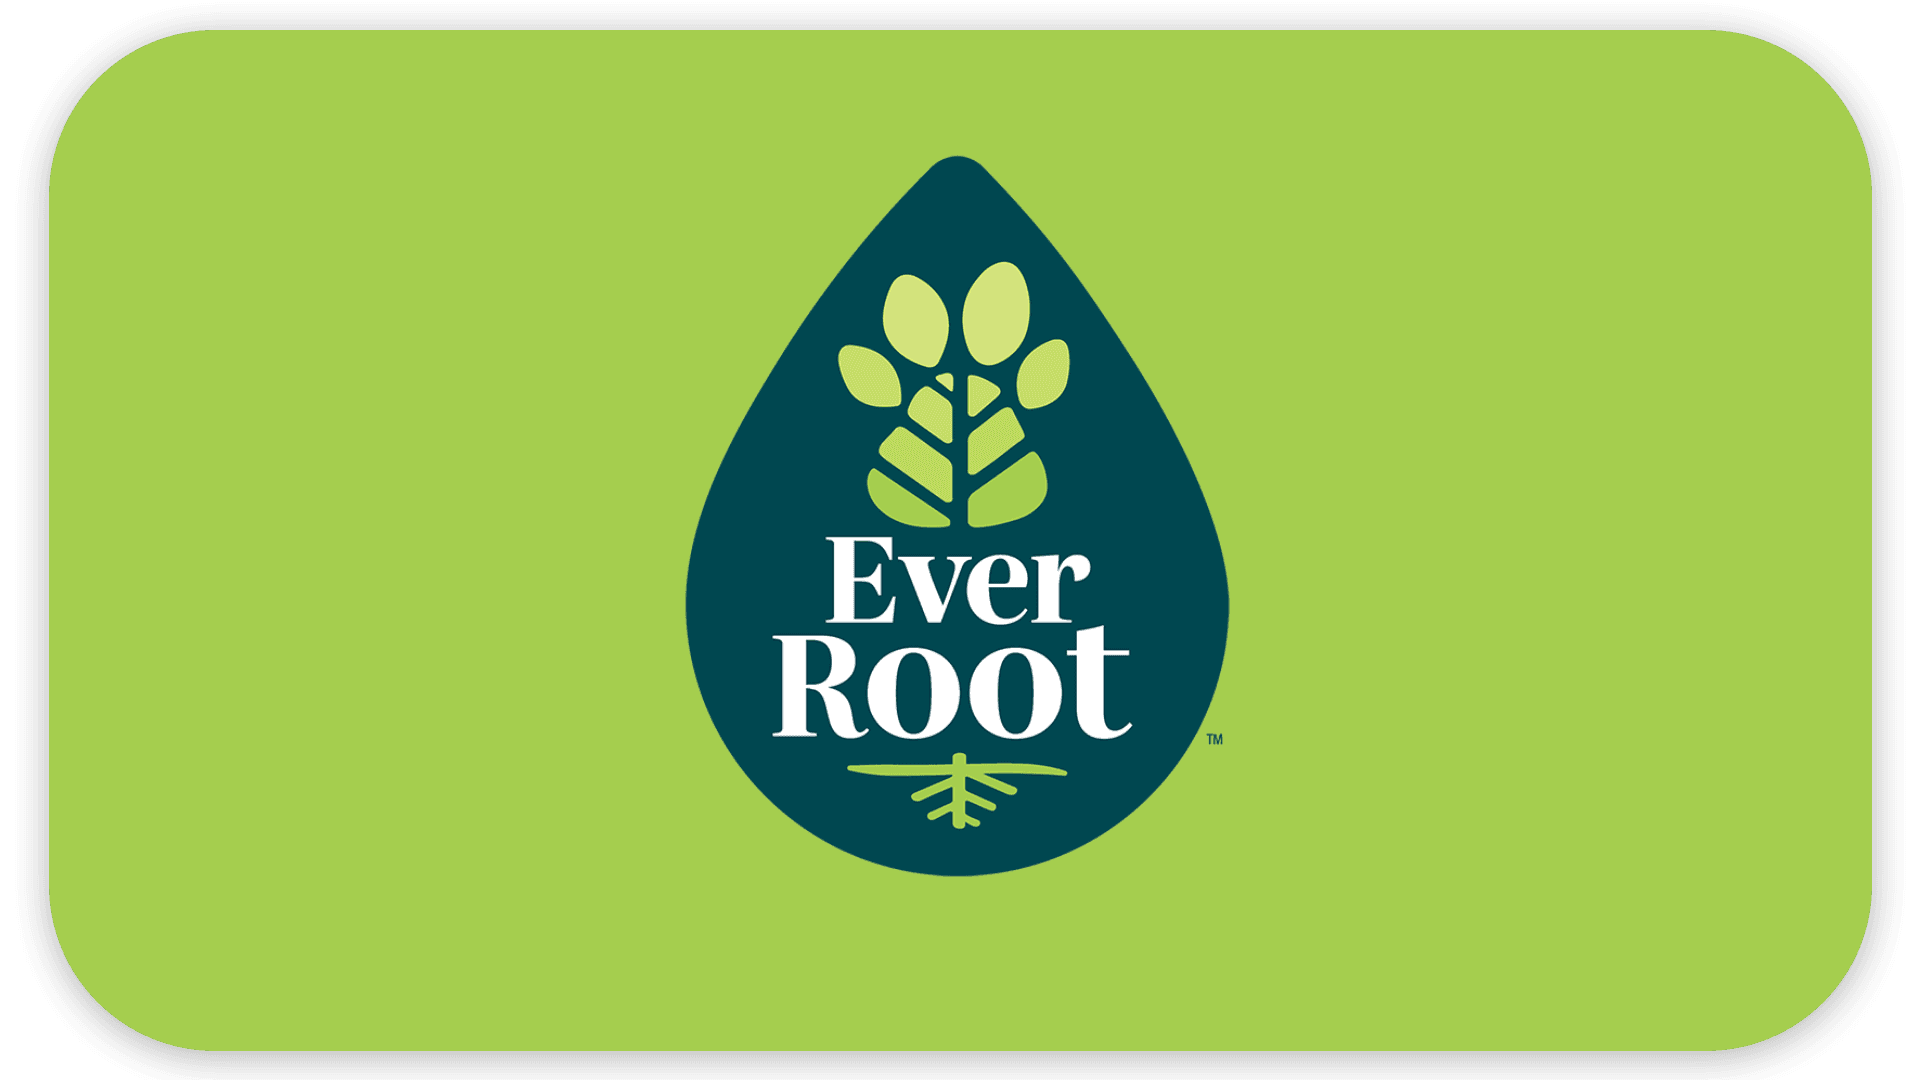 A dark green teardrop with a leaf design and the text "Ever Root" on a green background.